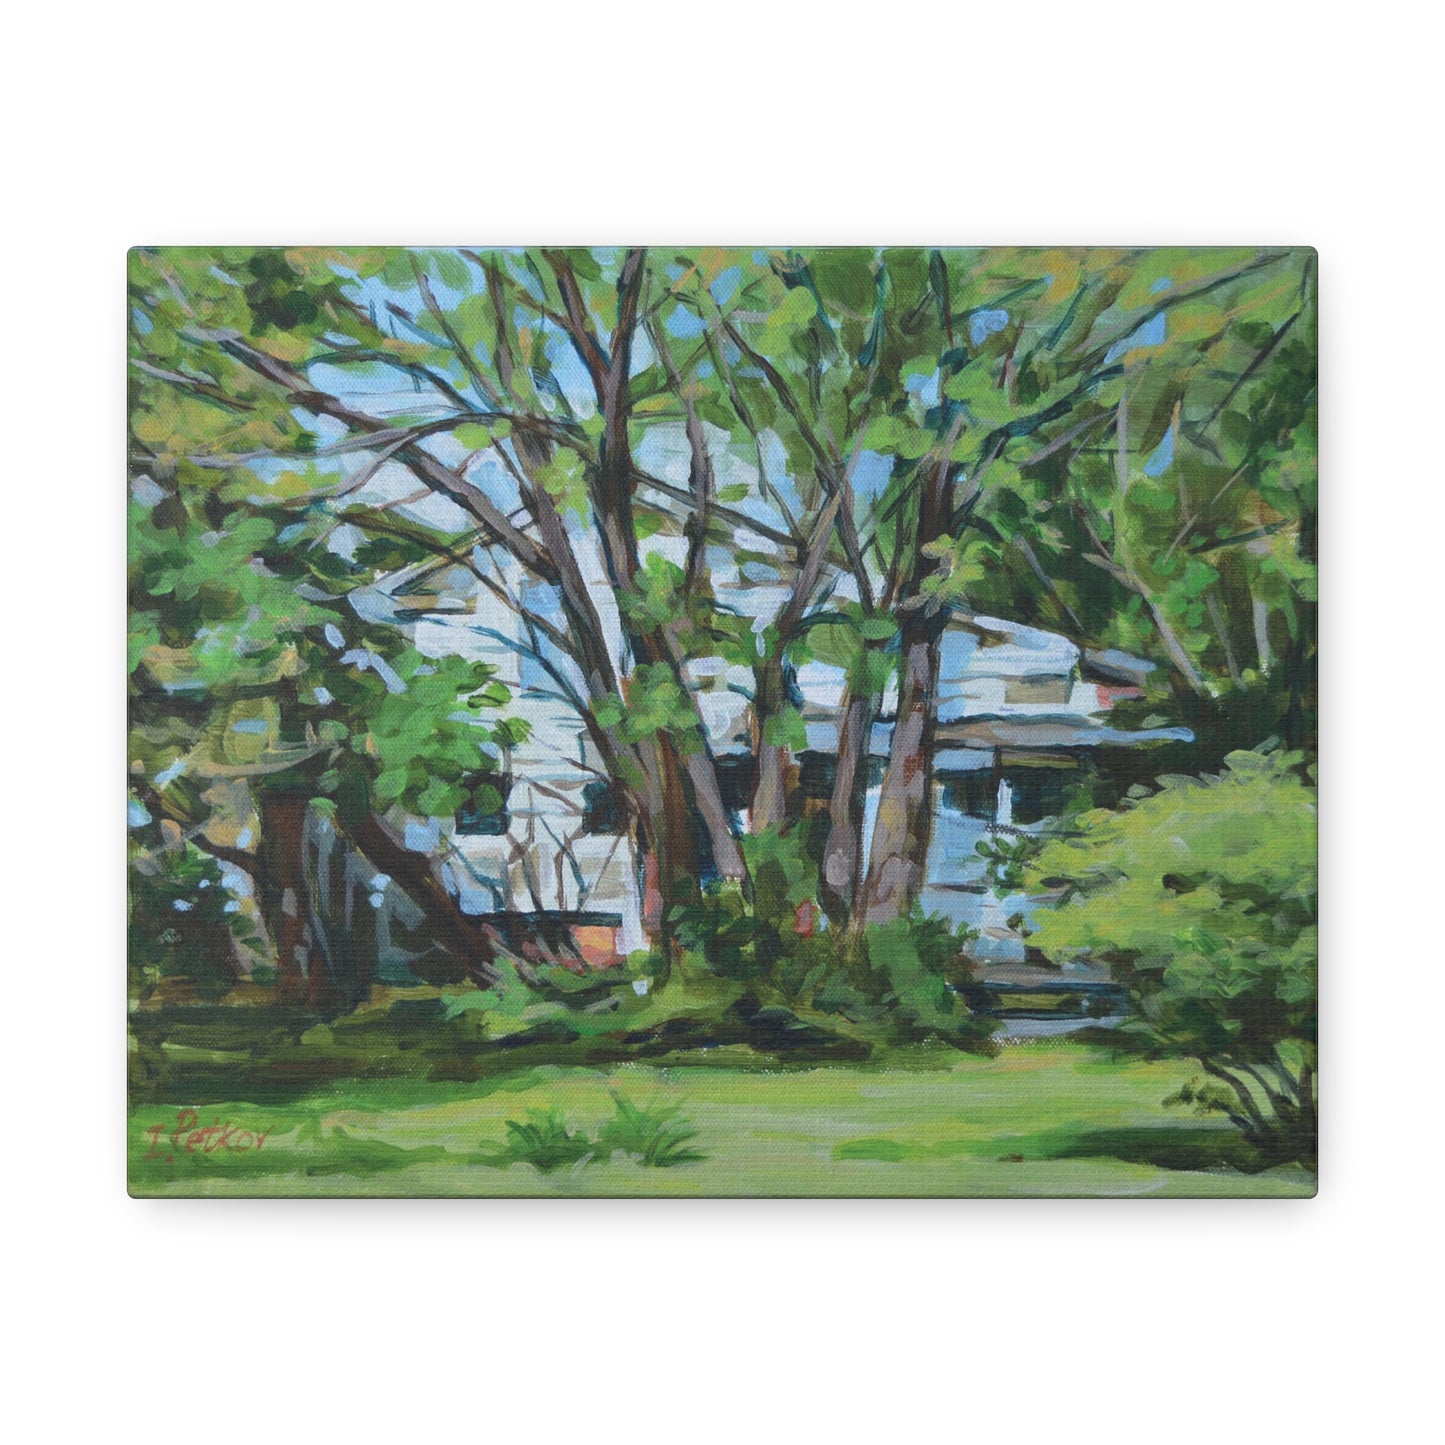 White House Amid Green - Canvas Print, Wall Art, Oil Painting, American Landscape